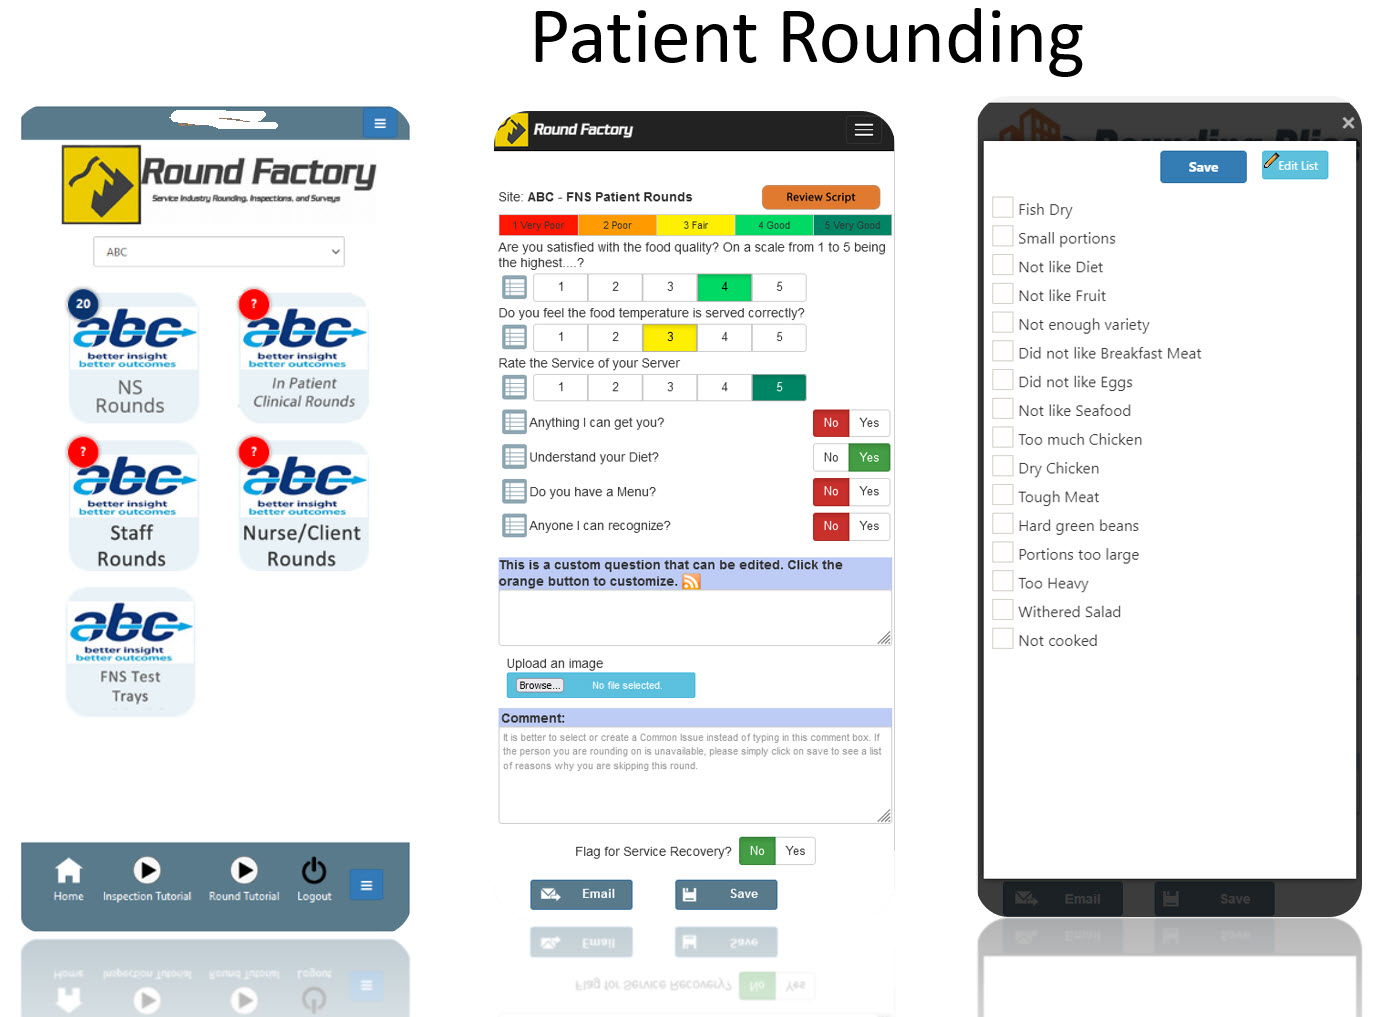 FNS Patient Rounding proven to increase patient satisfaction by 15% once hardwired